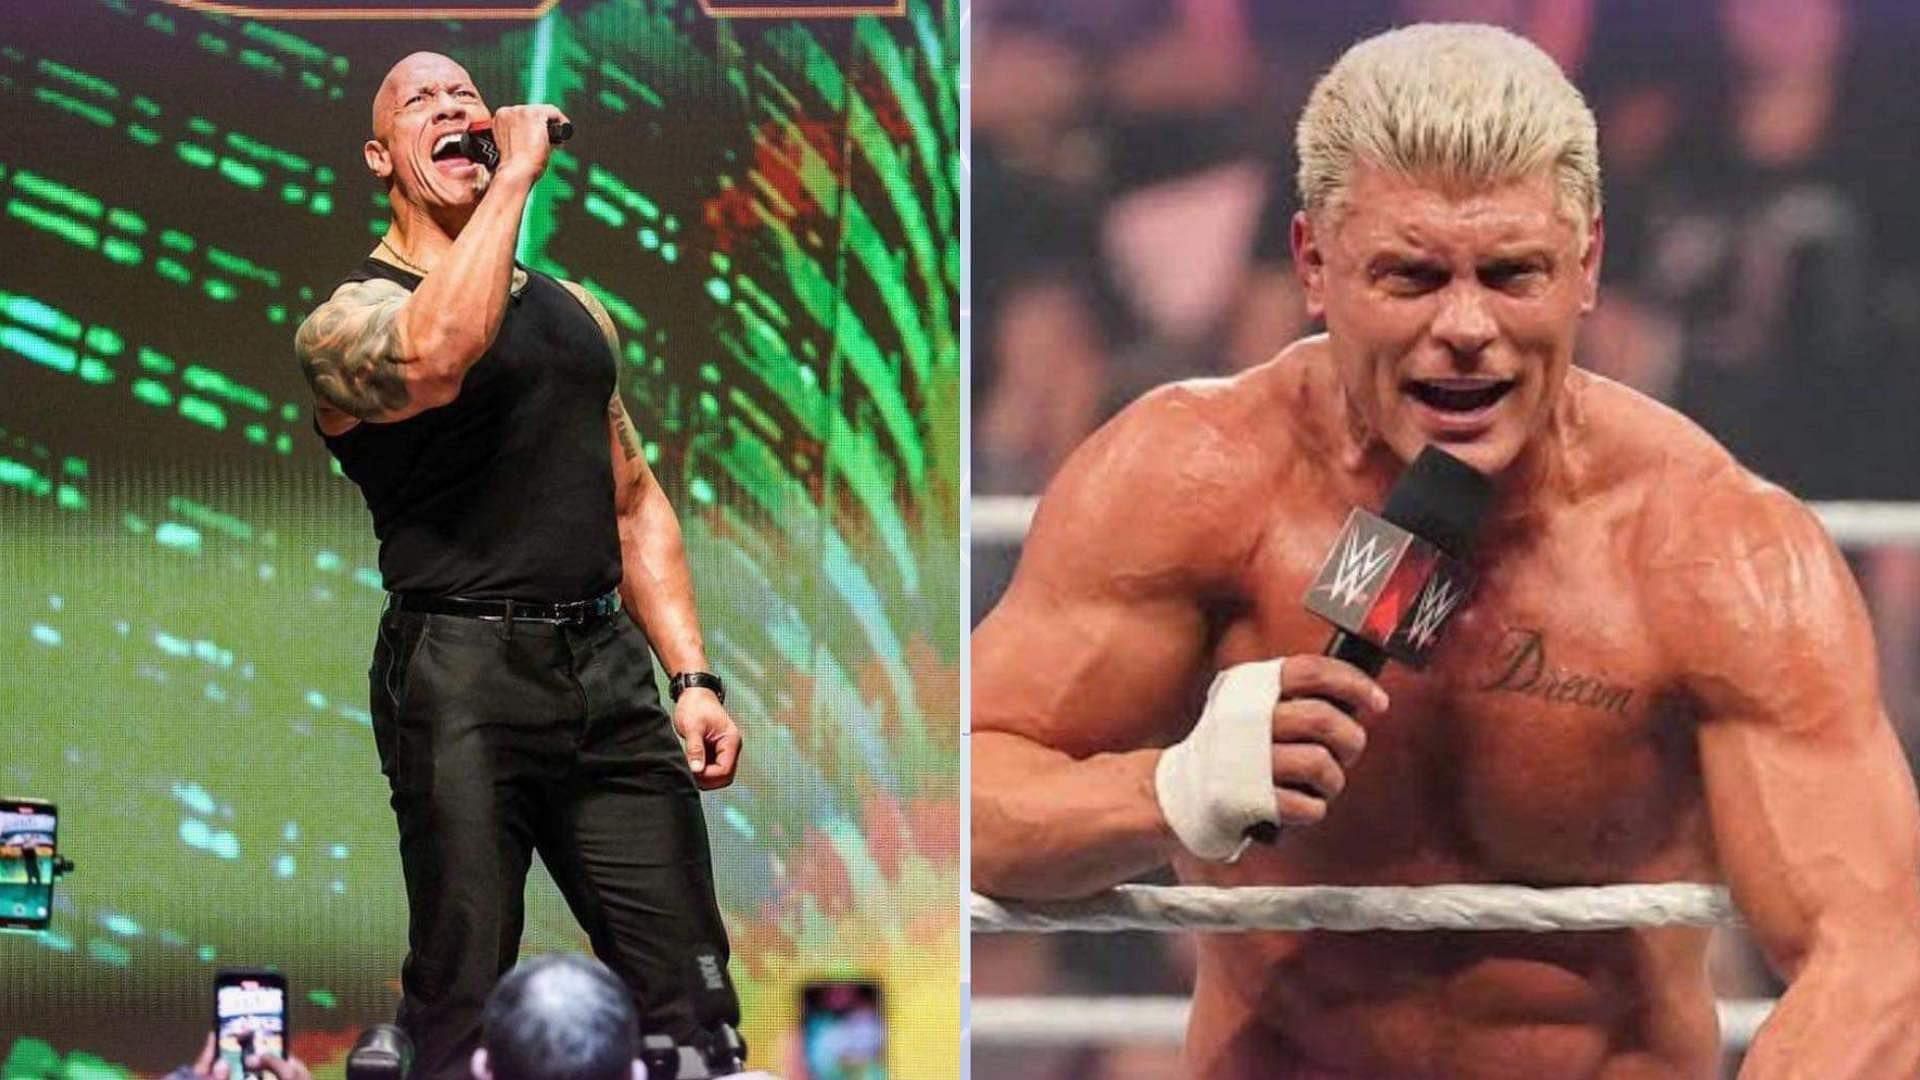 The Rock and Cody Rhodes will collide at WrestleMania XL 